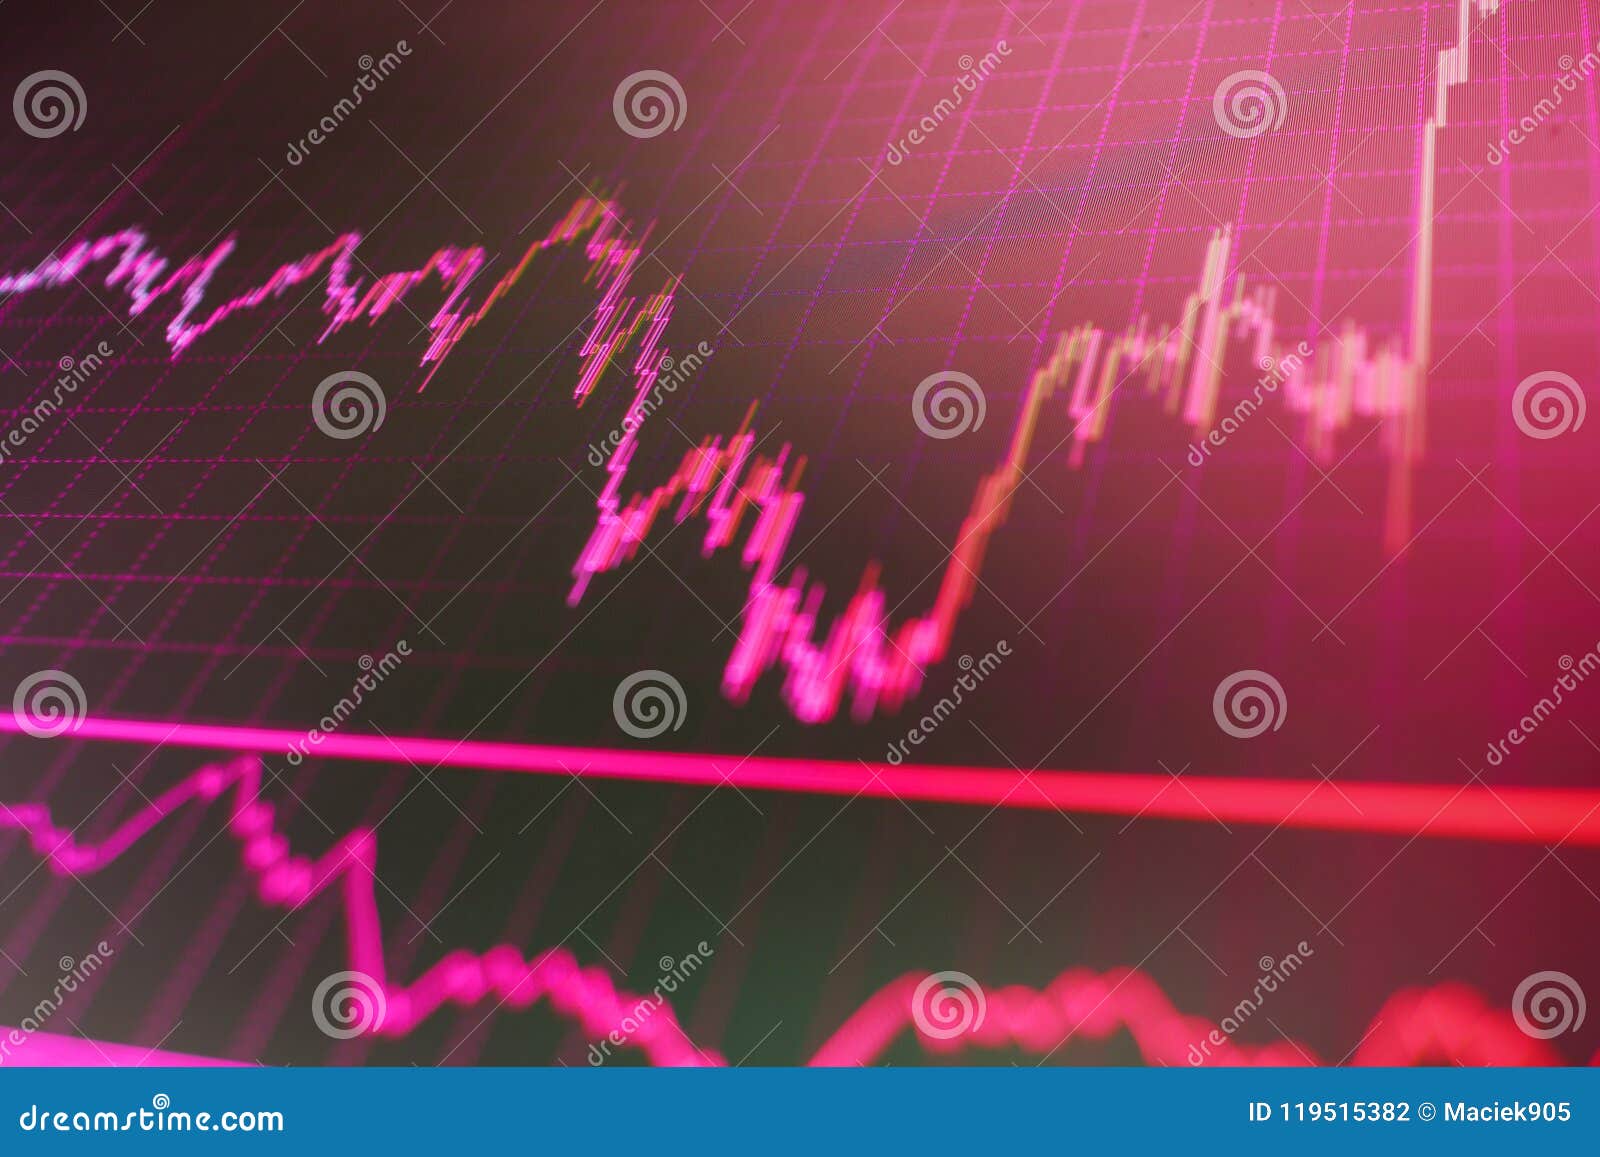 Forex Stock Charts